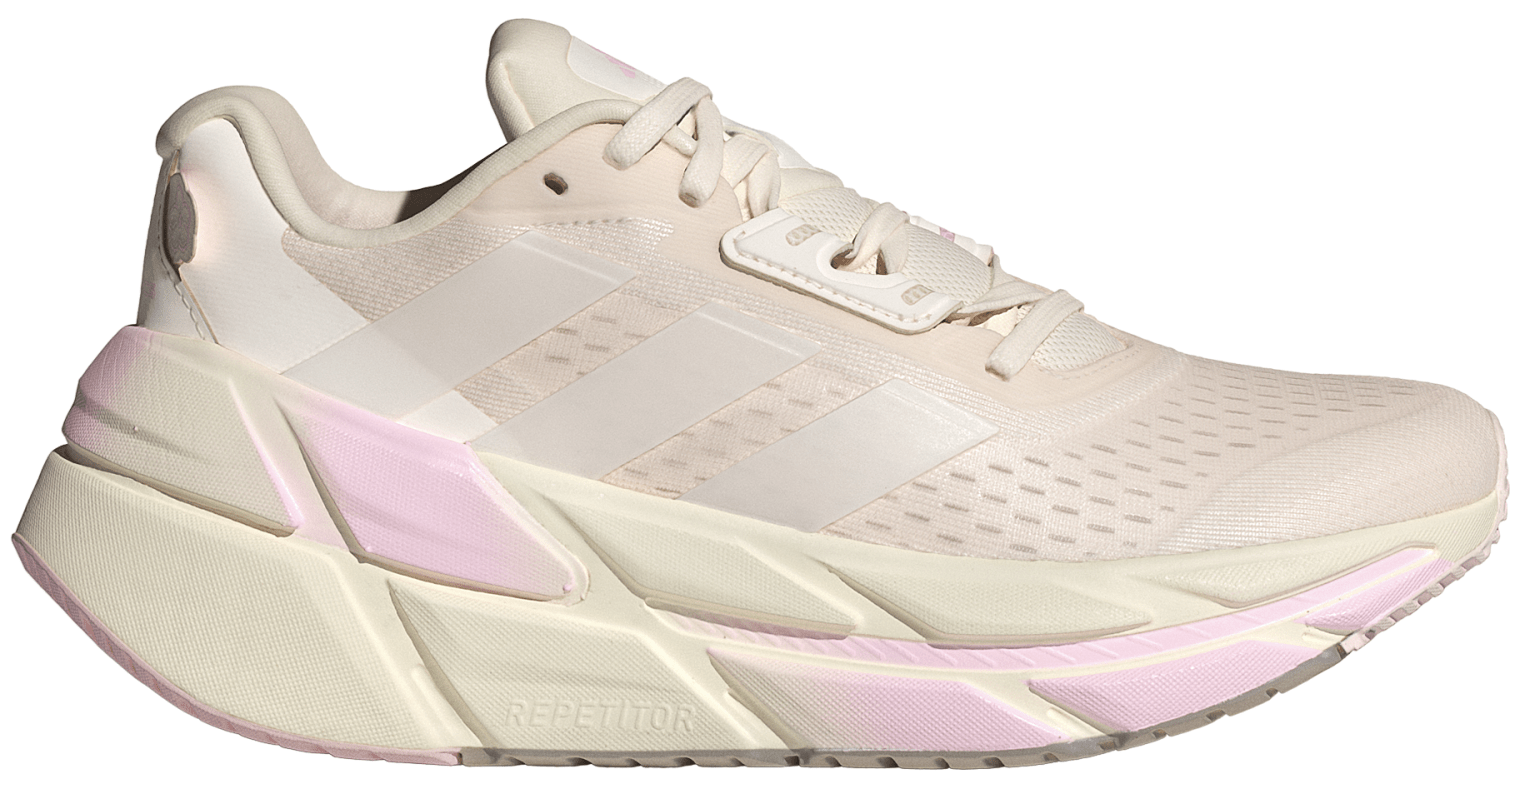 Adidas Women’s Adistar CS 2 Repetitor+ Running Shoes Cwhite/Crywht/Clpink